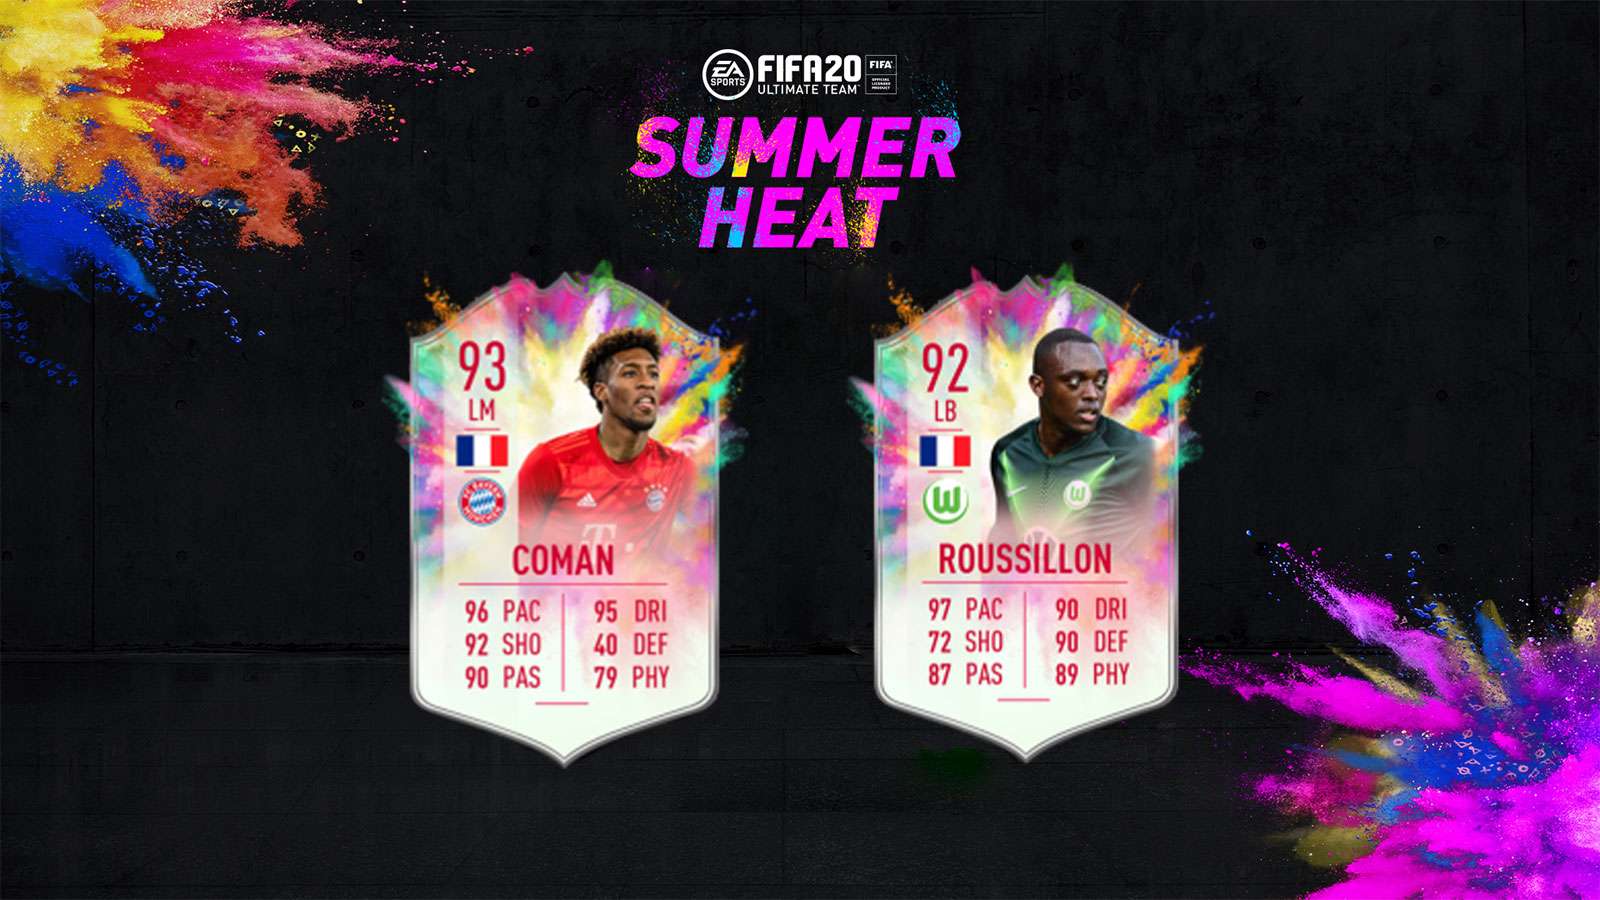 Coman and Roussillon FIFA 20 Summer Heat objective cards